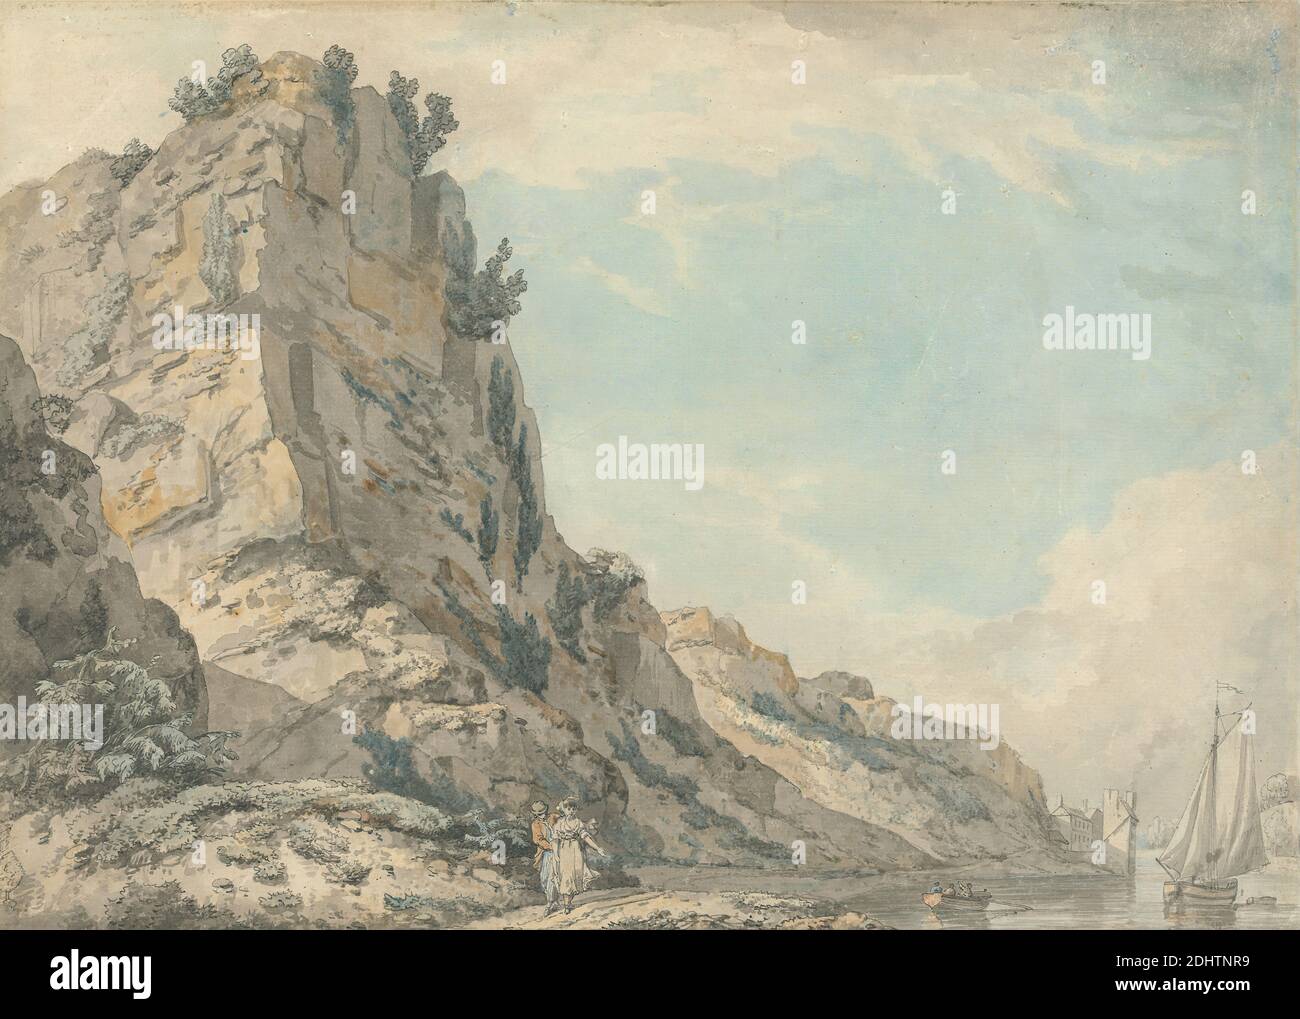 St. Vincent's Rock, Clifton, Bristol with Hotwell's Spring House in the Distance, Francis Wheatley, 1747–1801, British, undated, Watercolor with pen and black ink on medium, smooth, cream laid paper, Contemporary drawn border: 12 1/2 x 16 5/8 inches (31.8 x 42.2 cm) and Sheet: 10 3/4 x 14 7/8 inches (27.3 x 37.8 cm), apron, boats, bonnet, boots, cape, chimneys, coastline, coat, dress, flag, foliage, genre subject, hat, houses, mast, men, oars, rocks (landforms), sails, shoes, smoke, trousers, windows, woman, Bristol, Clifton, England, United Kingdom Stock Photo